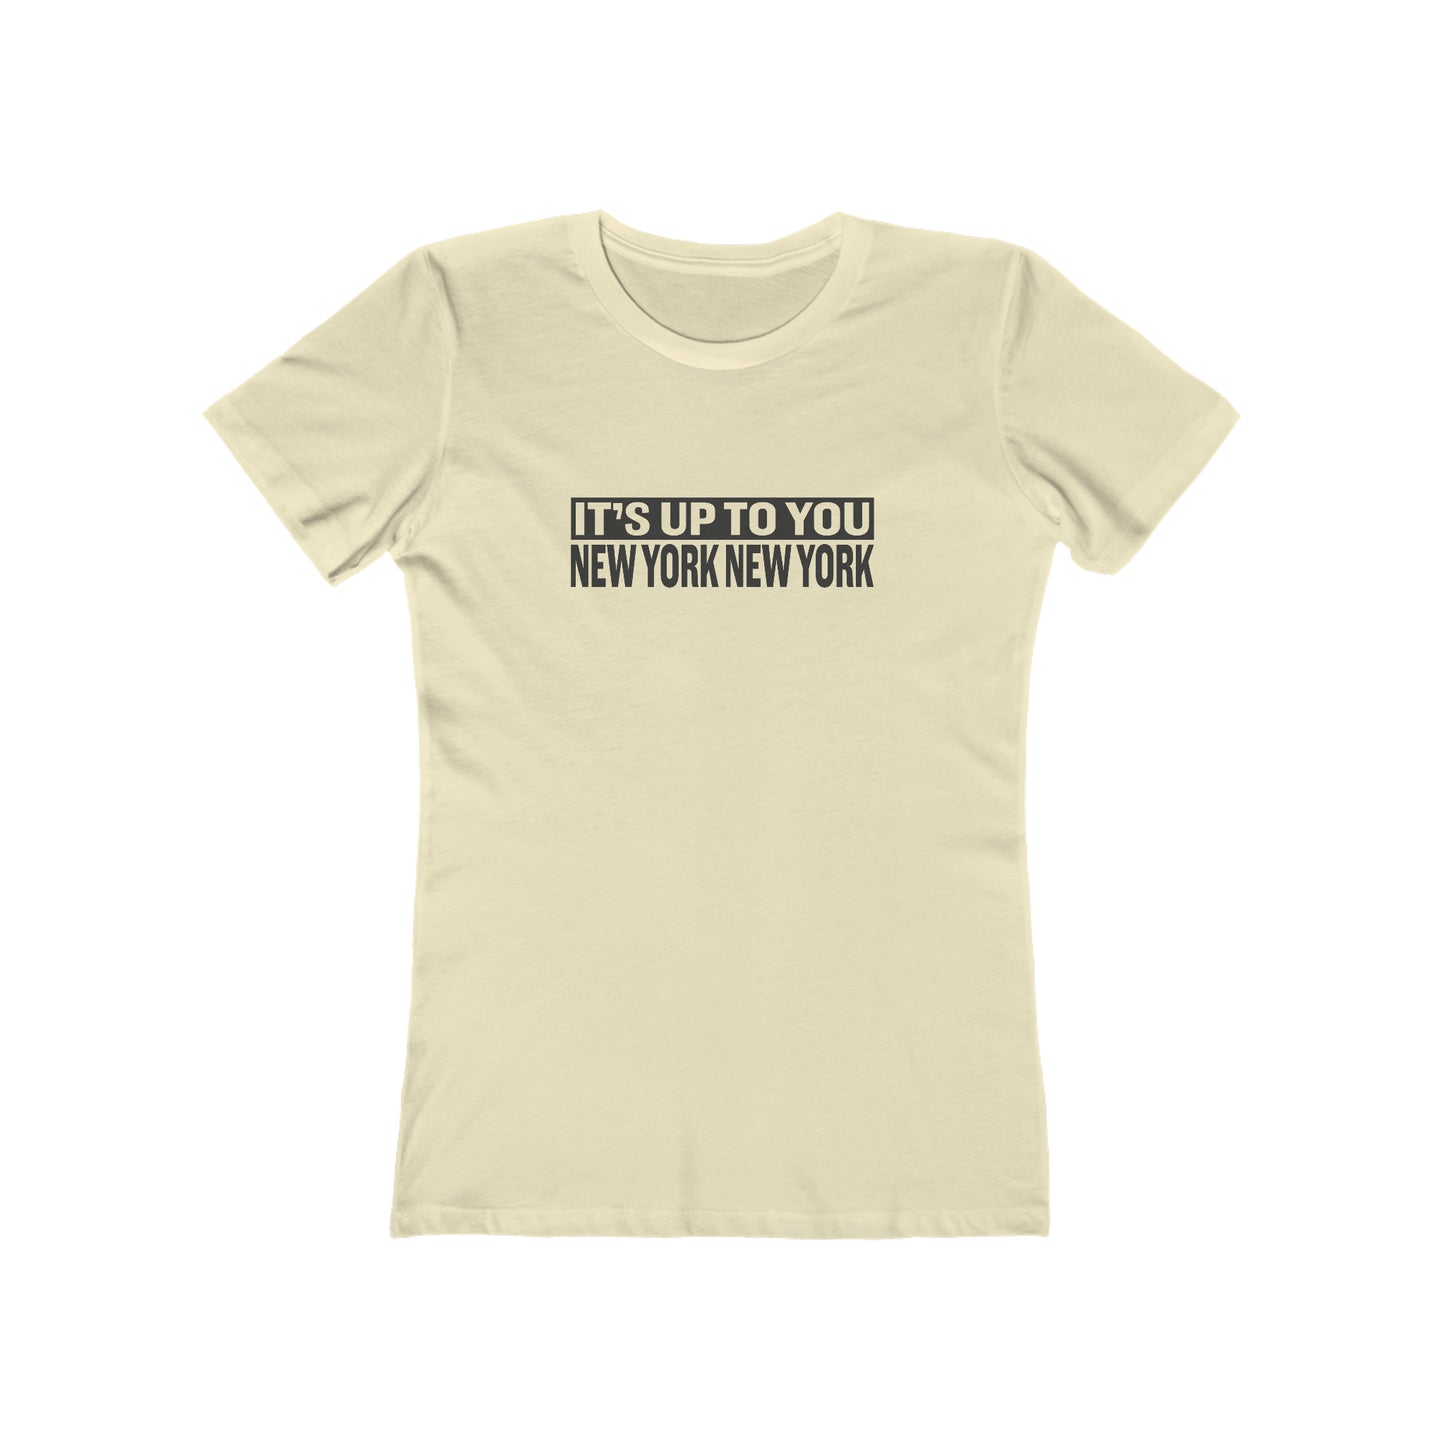 It's Up to You New York New York - Women's T-Shirt